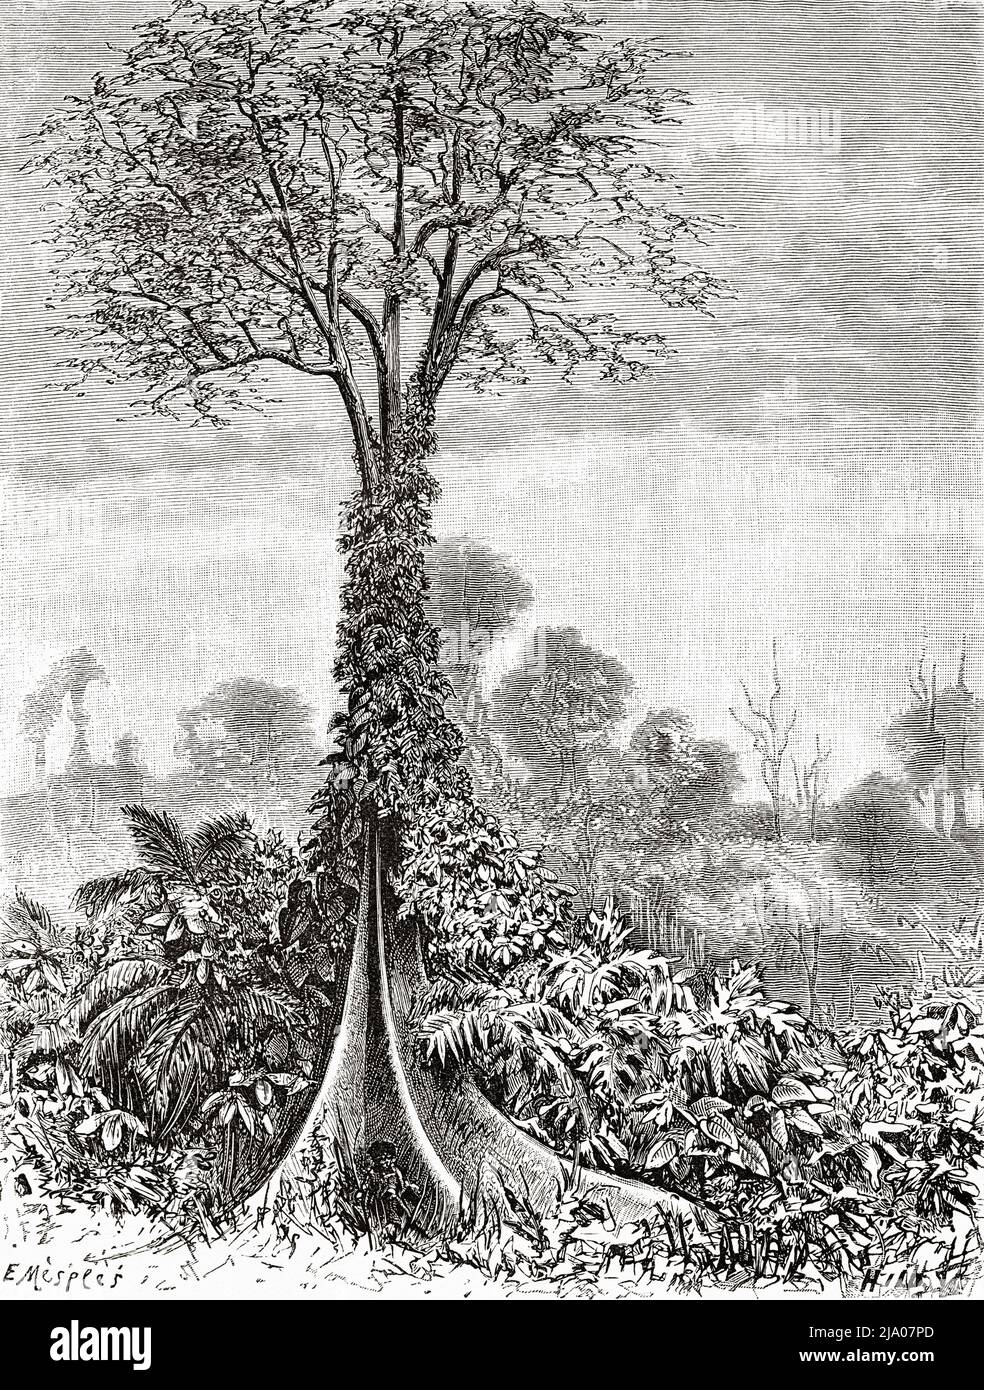 Ironwood tree in the tropical forest, Papua New Guinea, Indonesia, Asia. Trip to Papua New Guinea by Achille Raffray 1876-1877. Le Tour du Monde 1879 Stock Photo